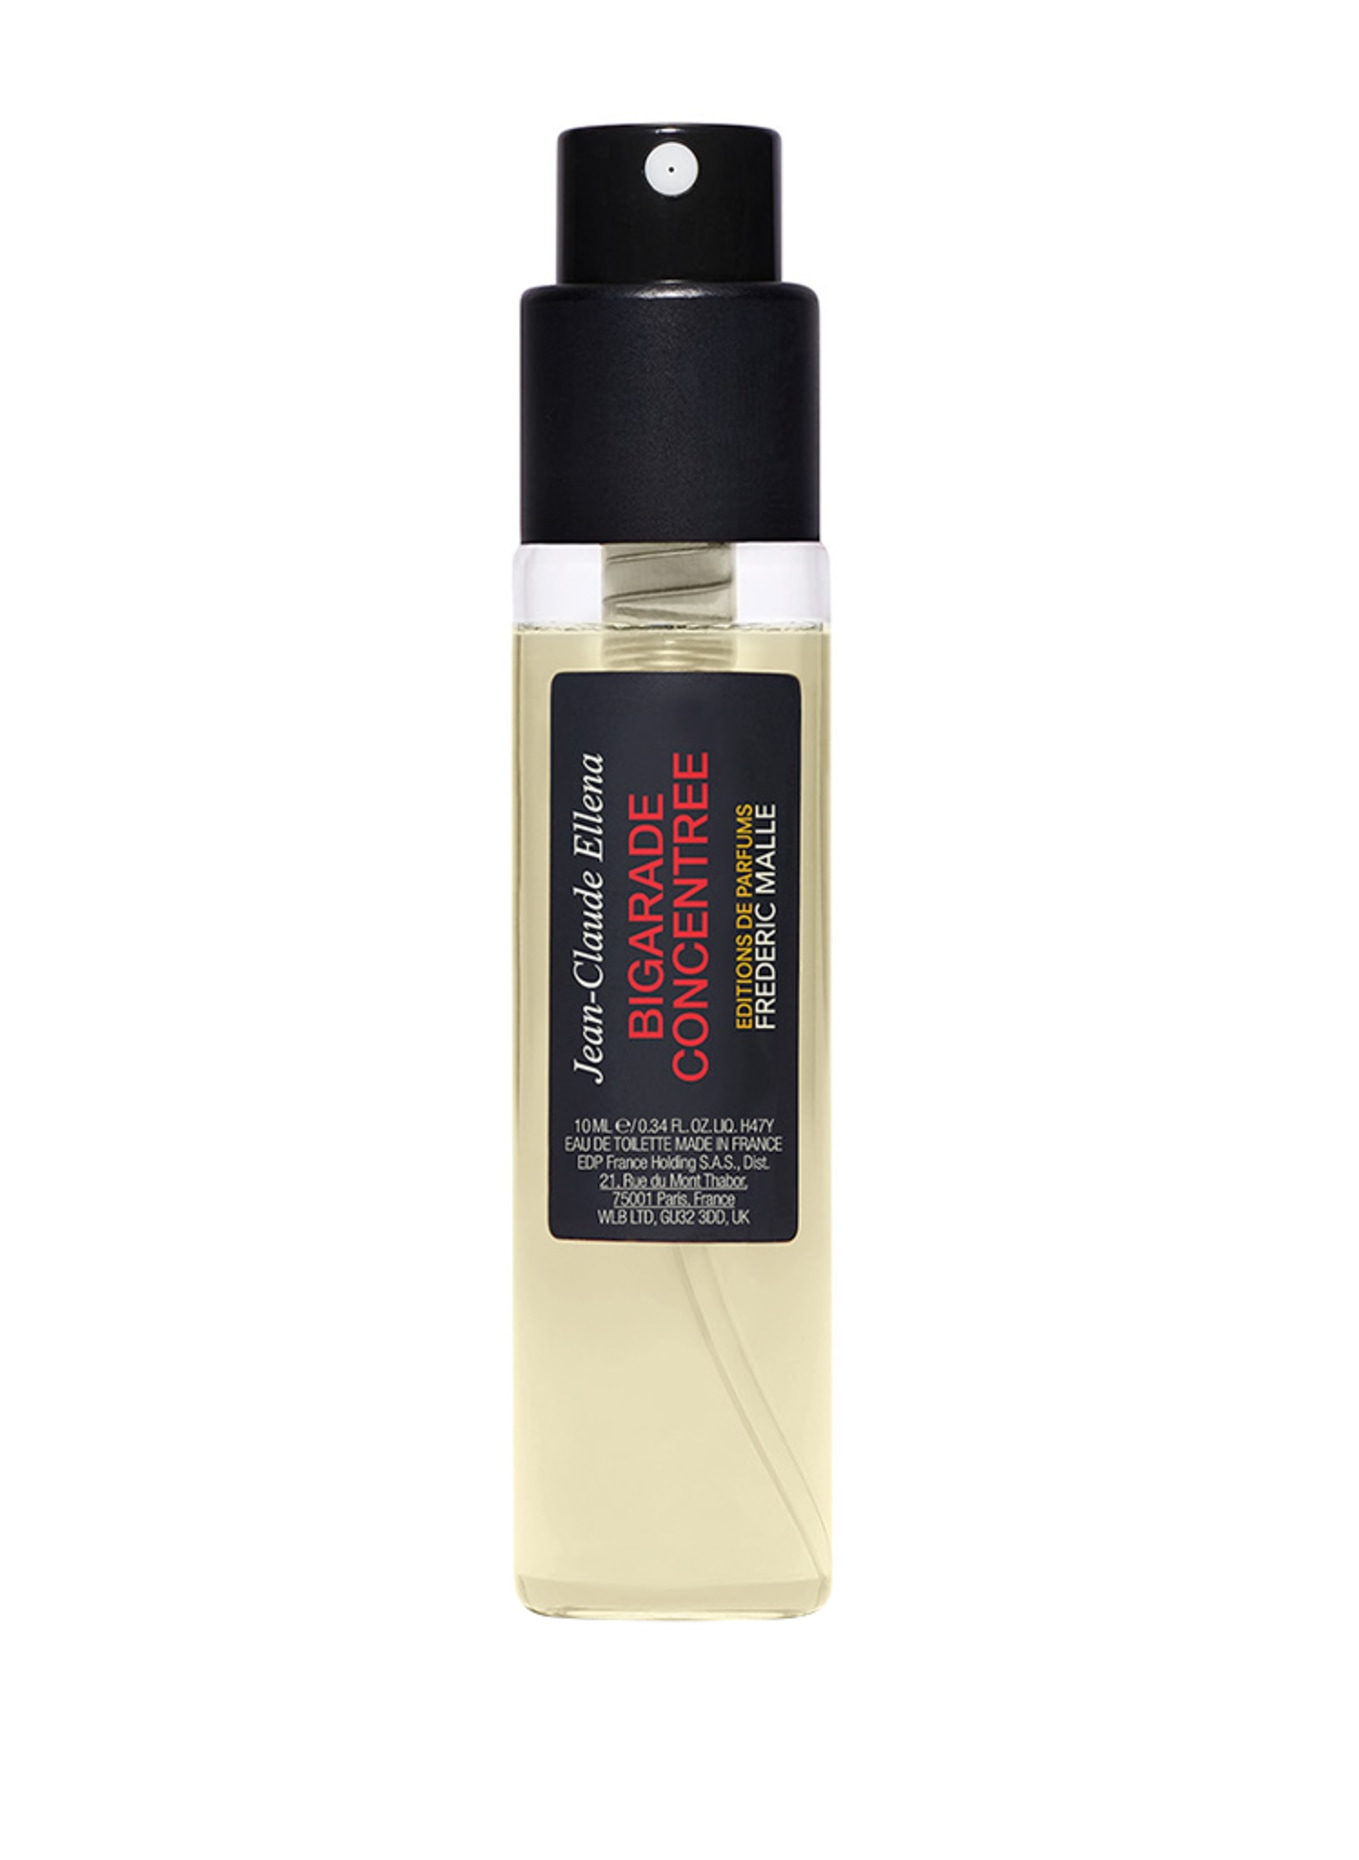 EDITIONS DE PARFUMS FREDERIC MALLE BIGARADE CONCENTREE (Obrazek 1)